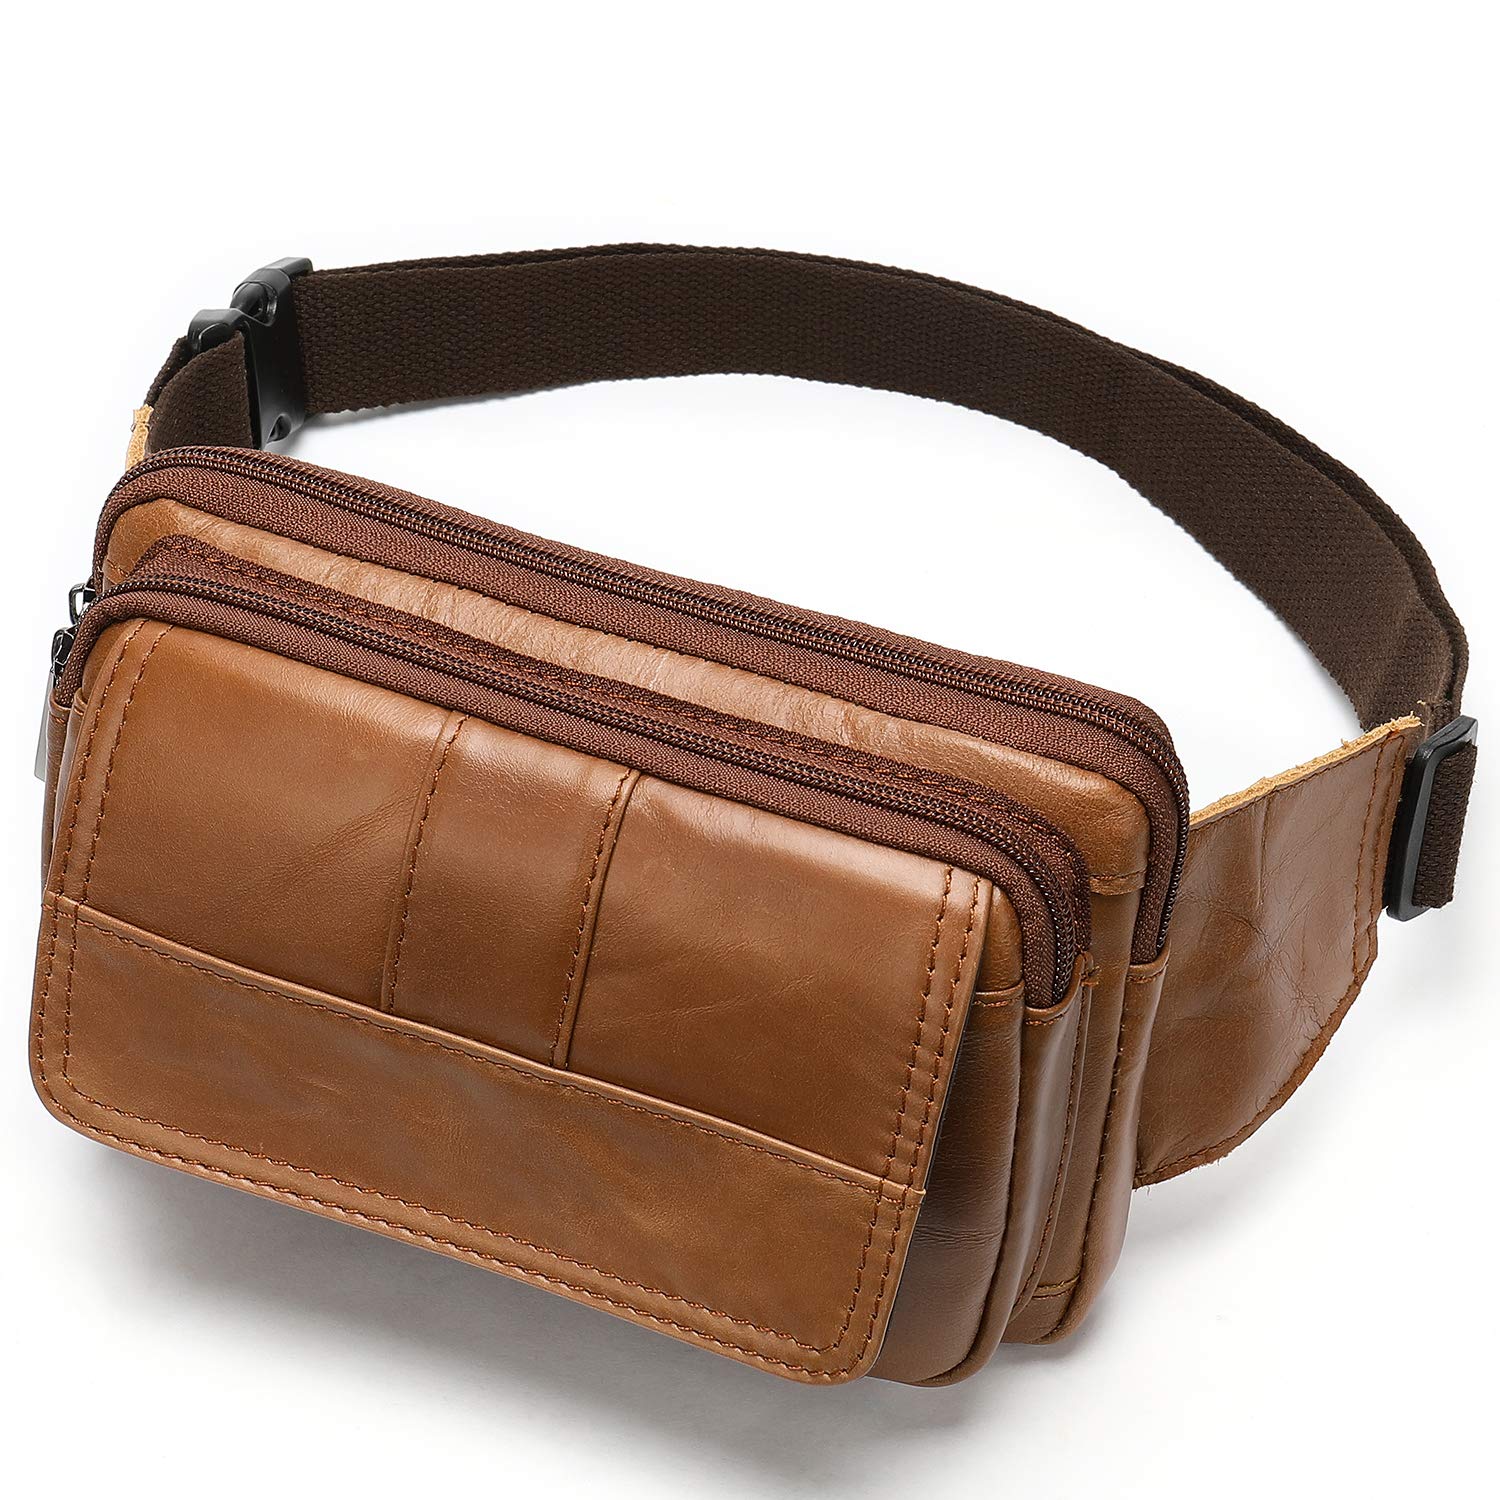 Fanny Pack for Men and Women, Leather Sling Waist Bag for Hiking Running Travel - Durable Cowhide Leather